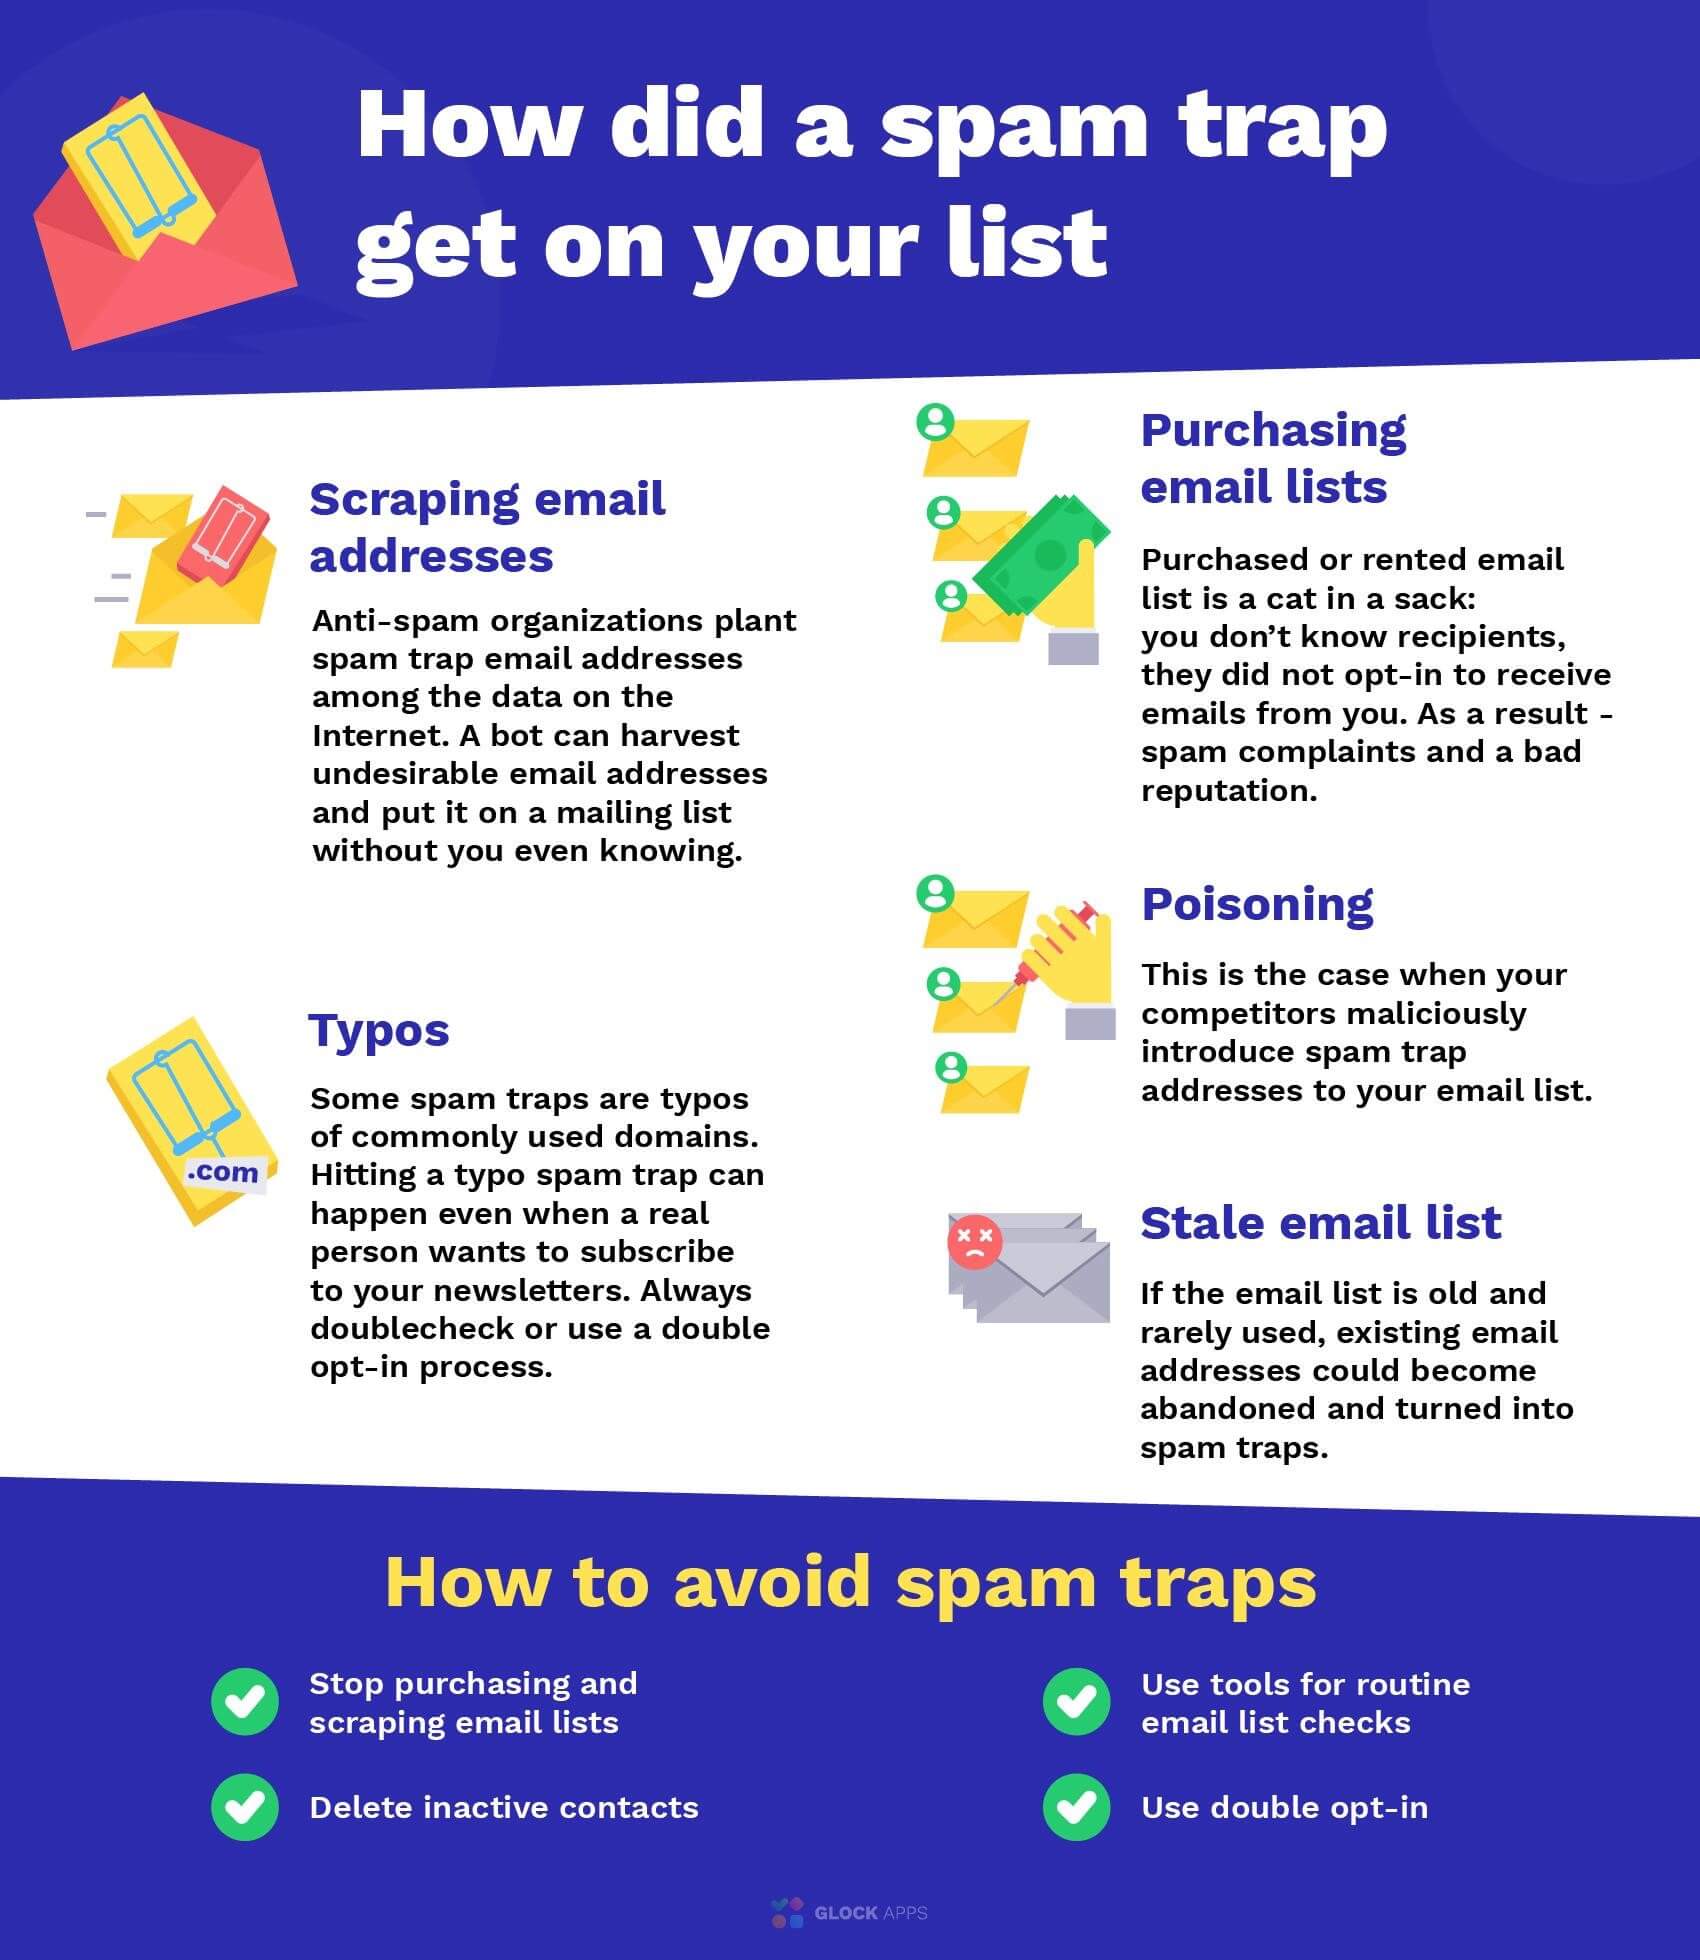 How a spam trap gets on an email list and how to avoid spam traps